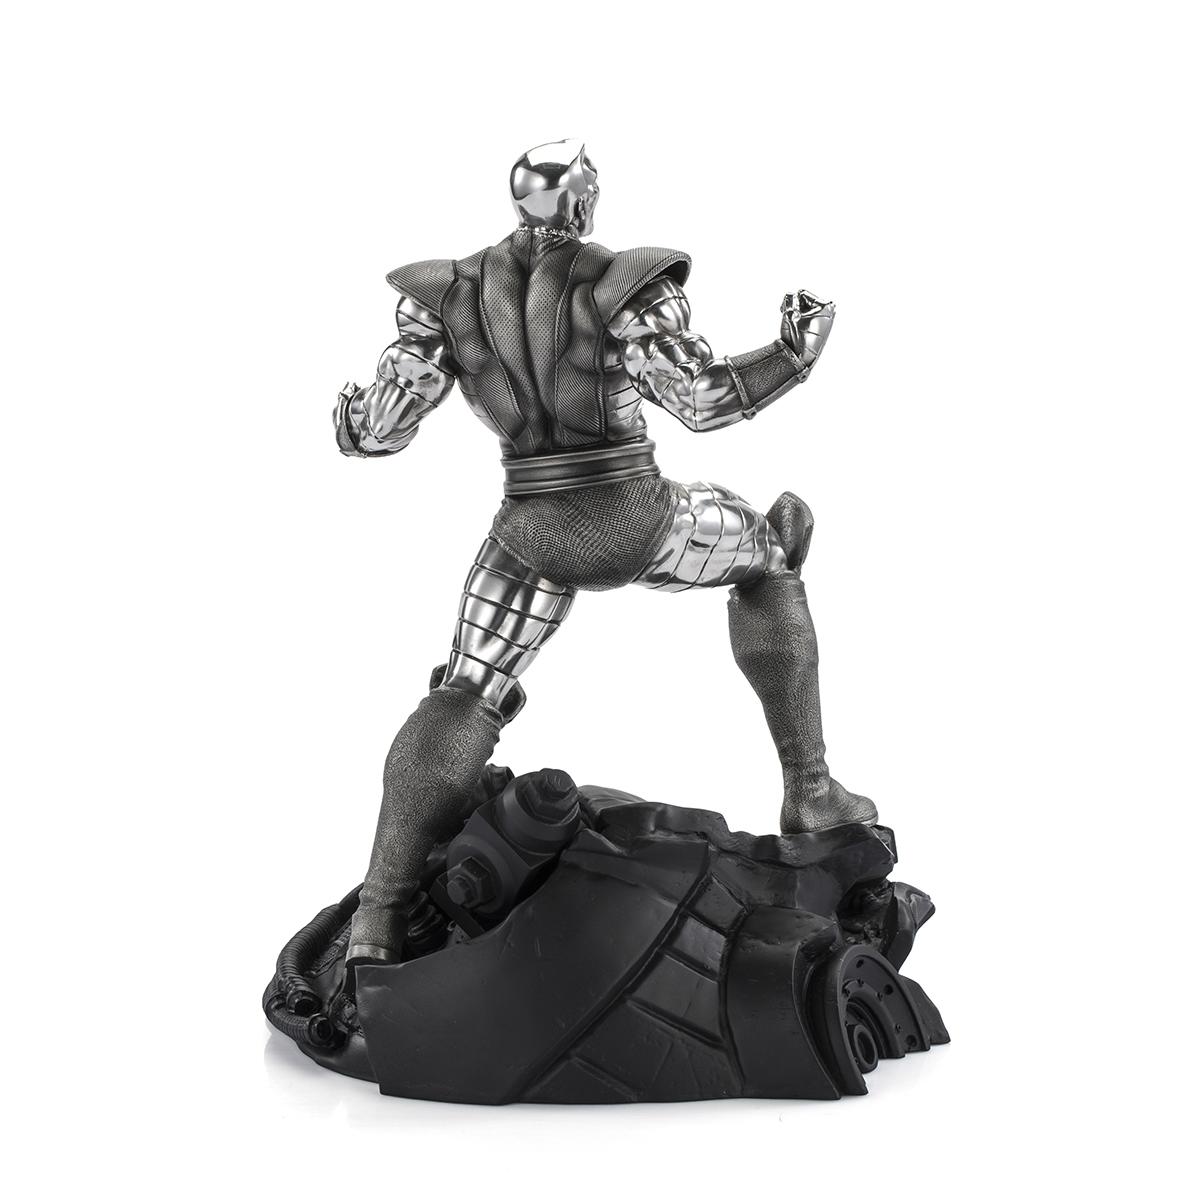 Limited Edition Colossus Victorious Figurine Royal Selangor Marvel Collection